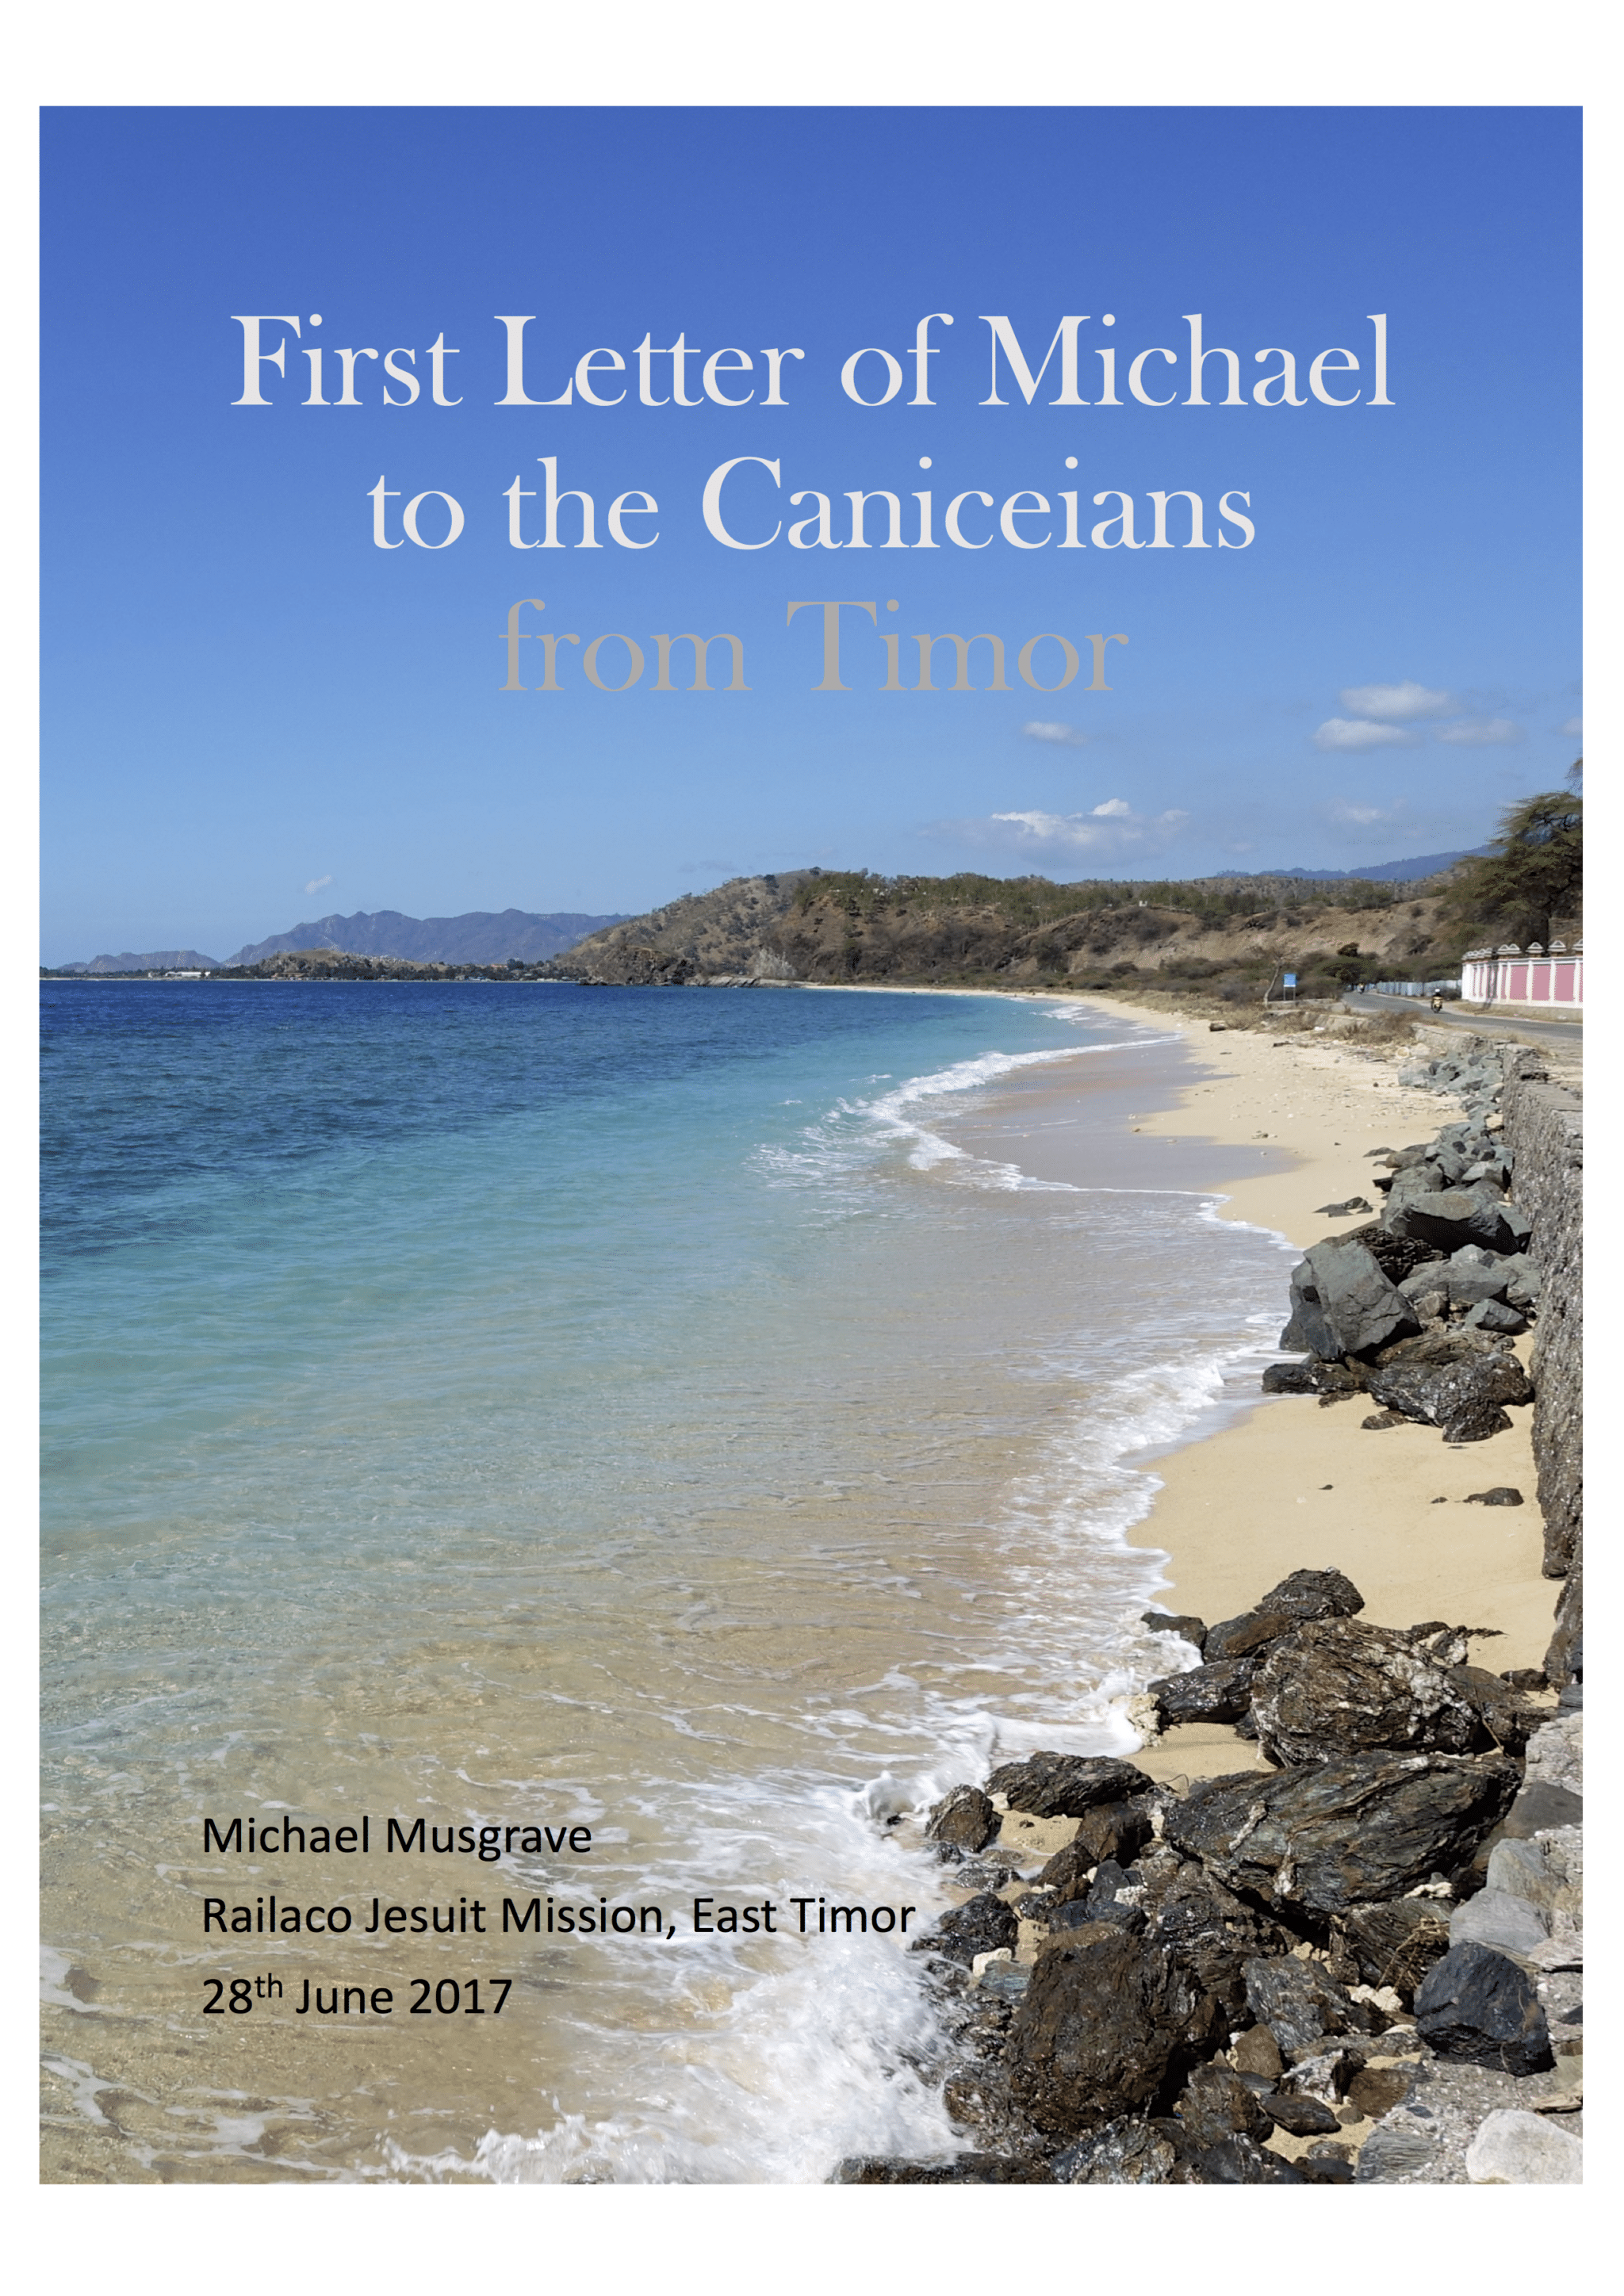 First Letter from Michael -cover to report